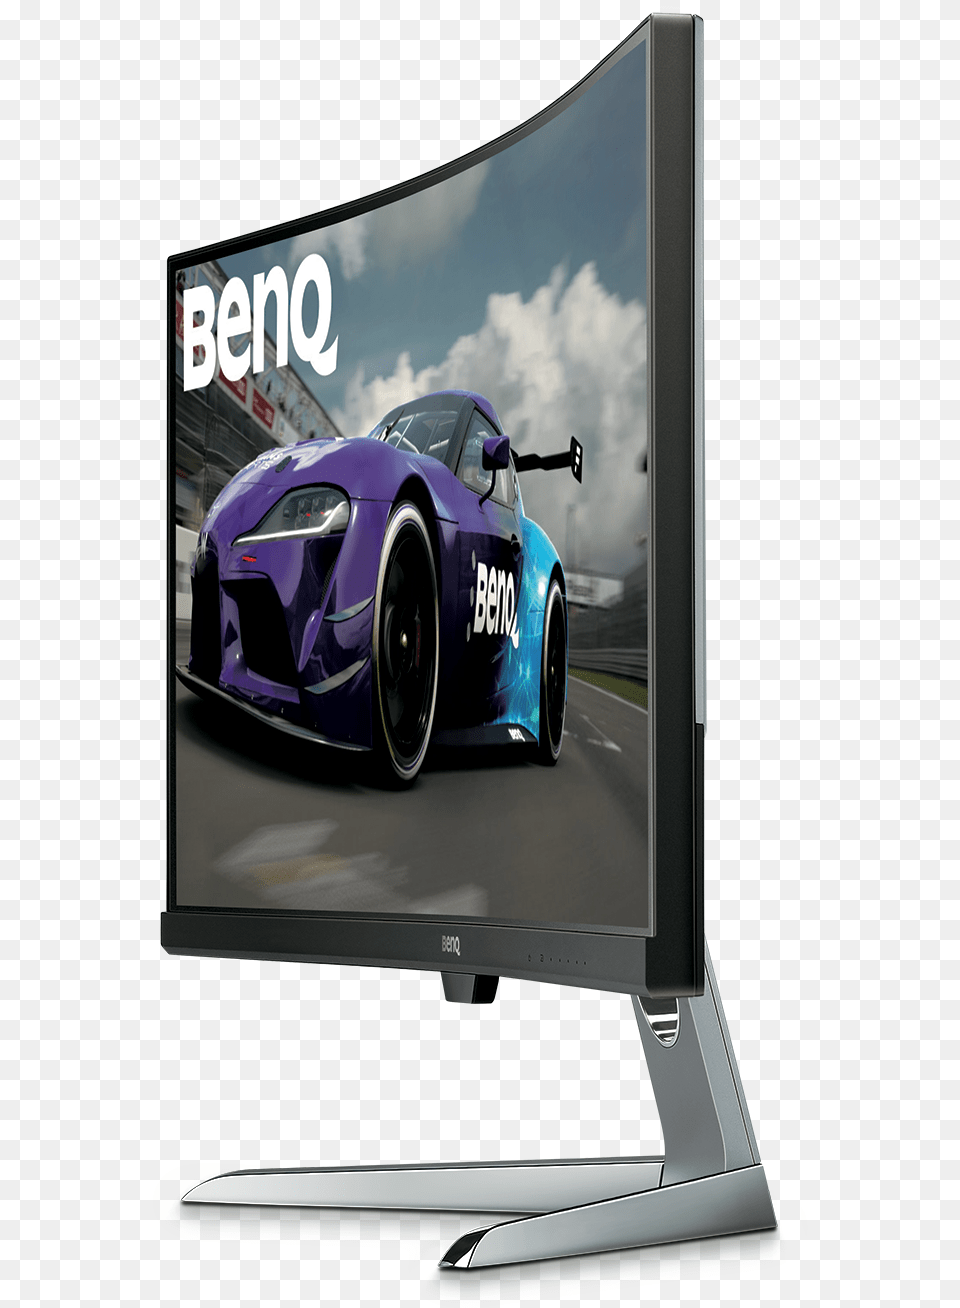 Benq Ex3501r Hdr Ultrawide Curved Entertainment Monitor 35 Inch Computer Monitor, Computer Hardware, Electronics, Hardware, Tv Png